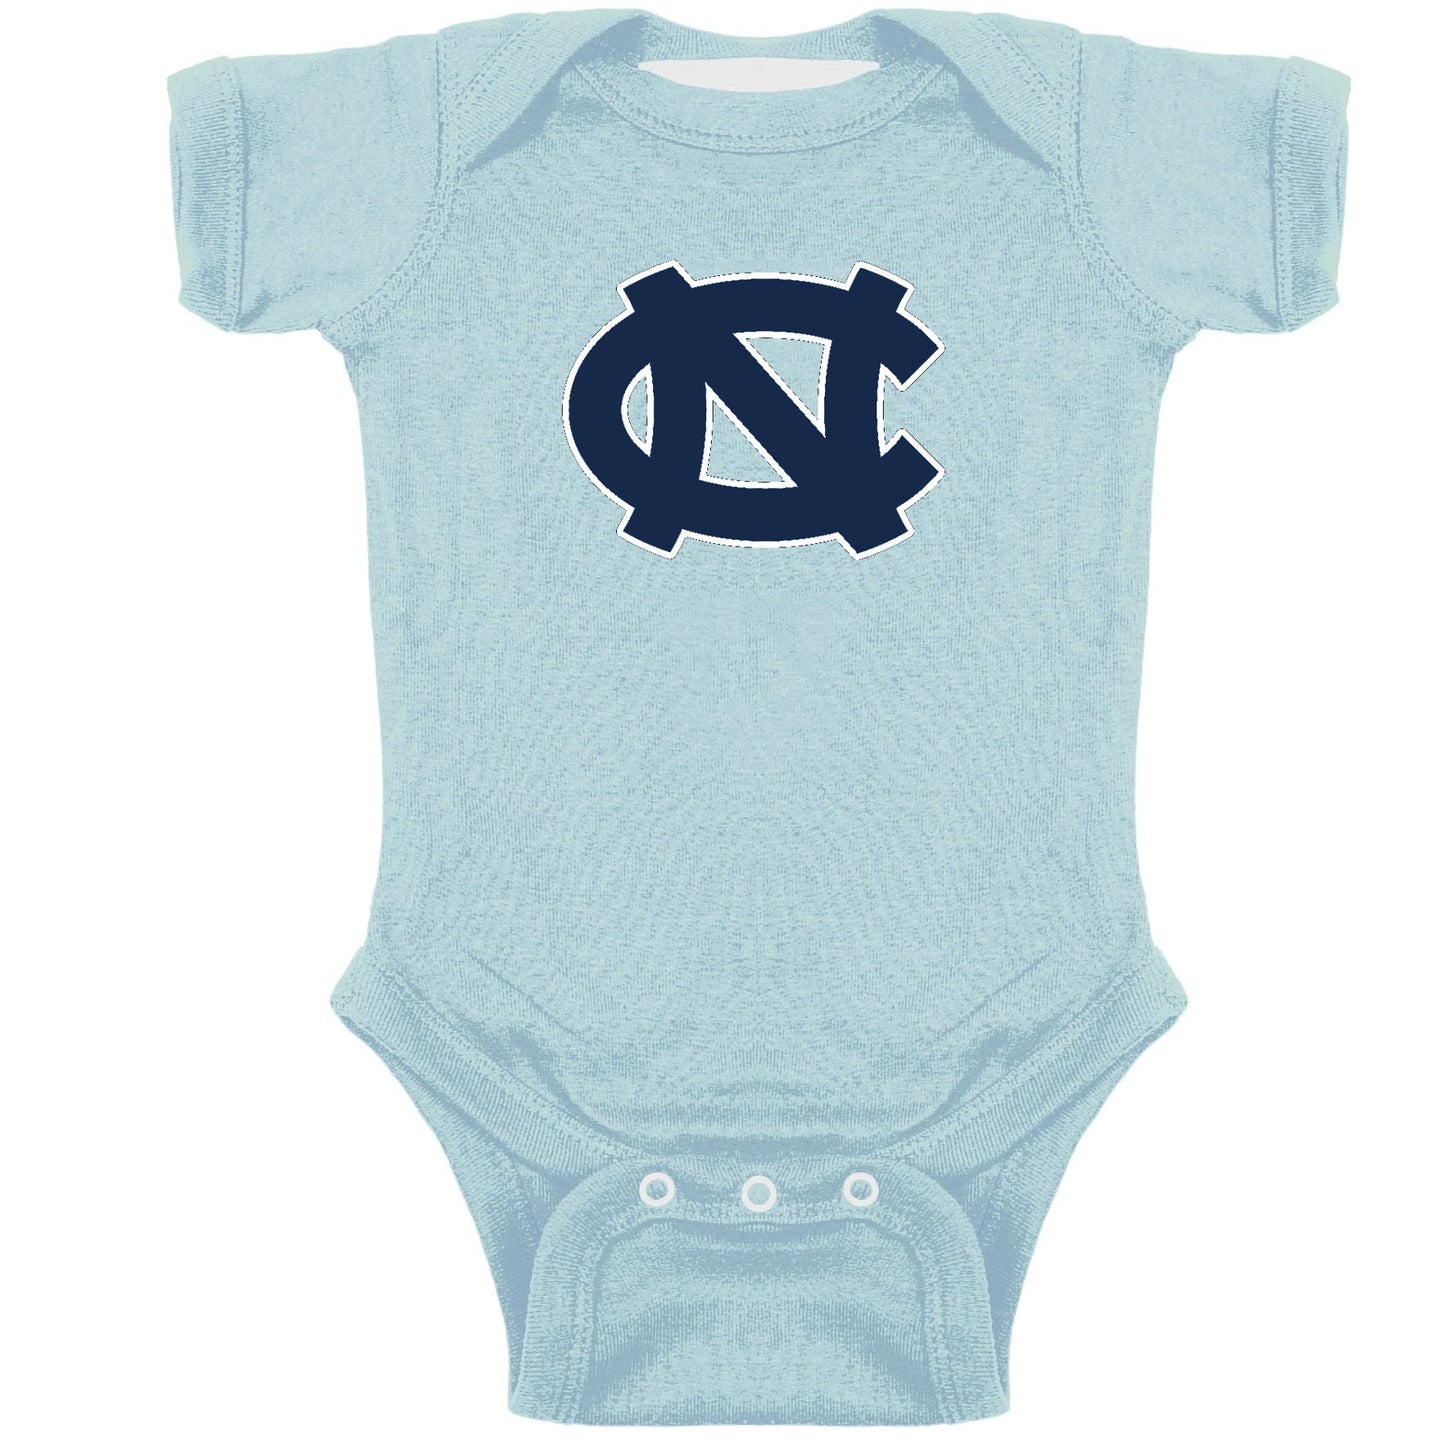 UNC Baby Onesie with Embroidered Logo